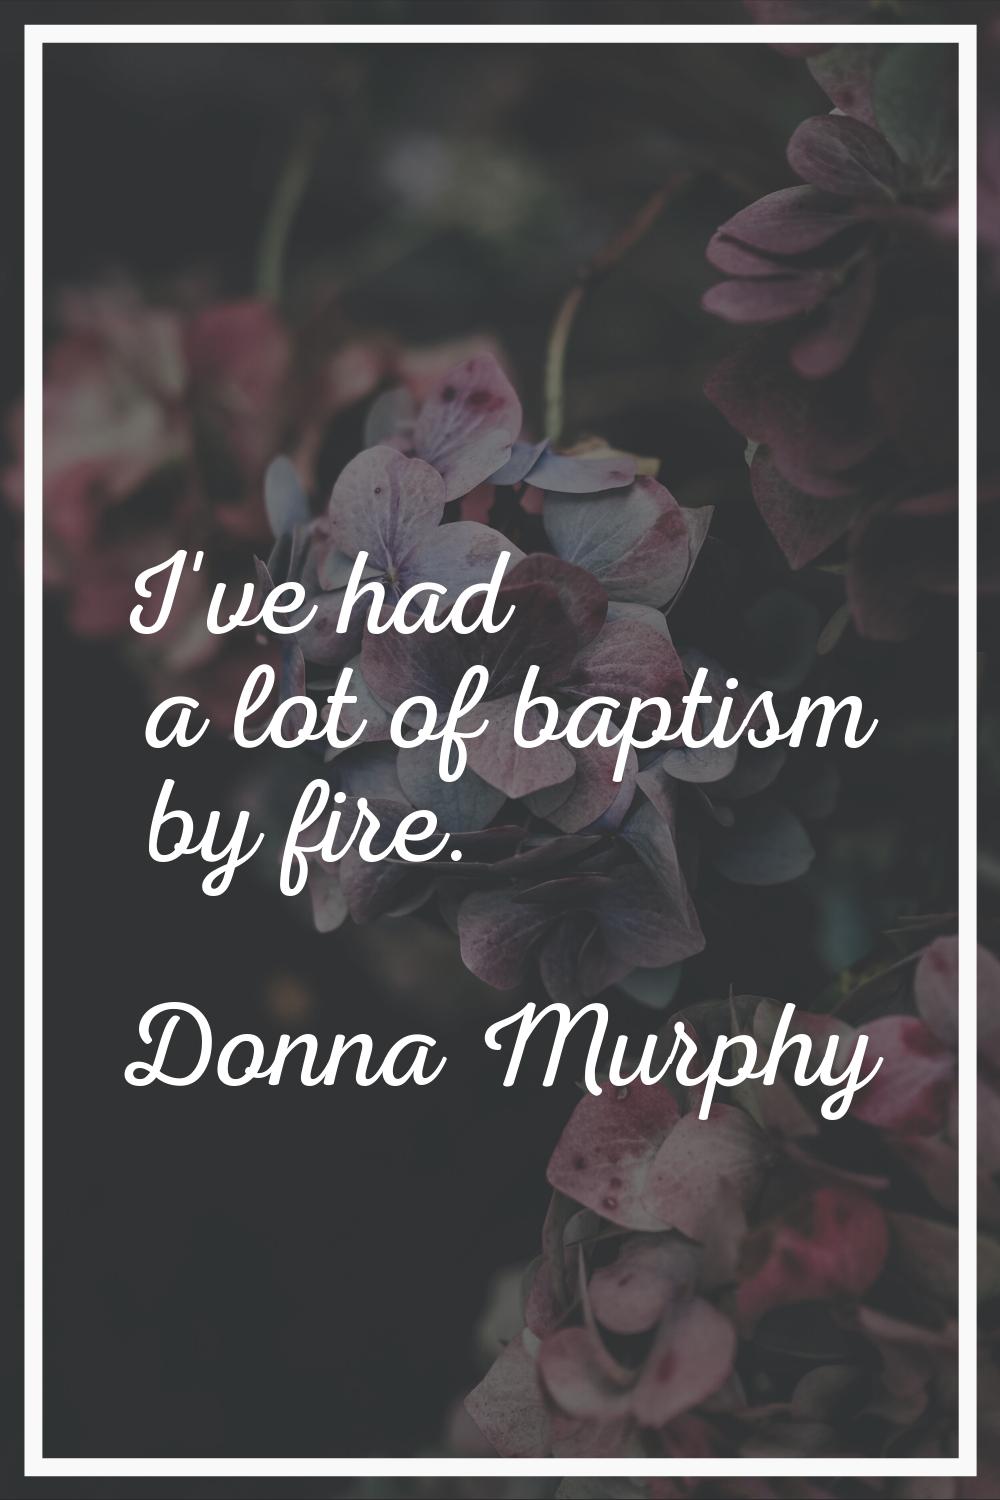 I've had a lot of baptism by fire.